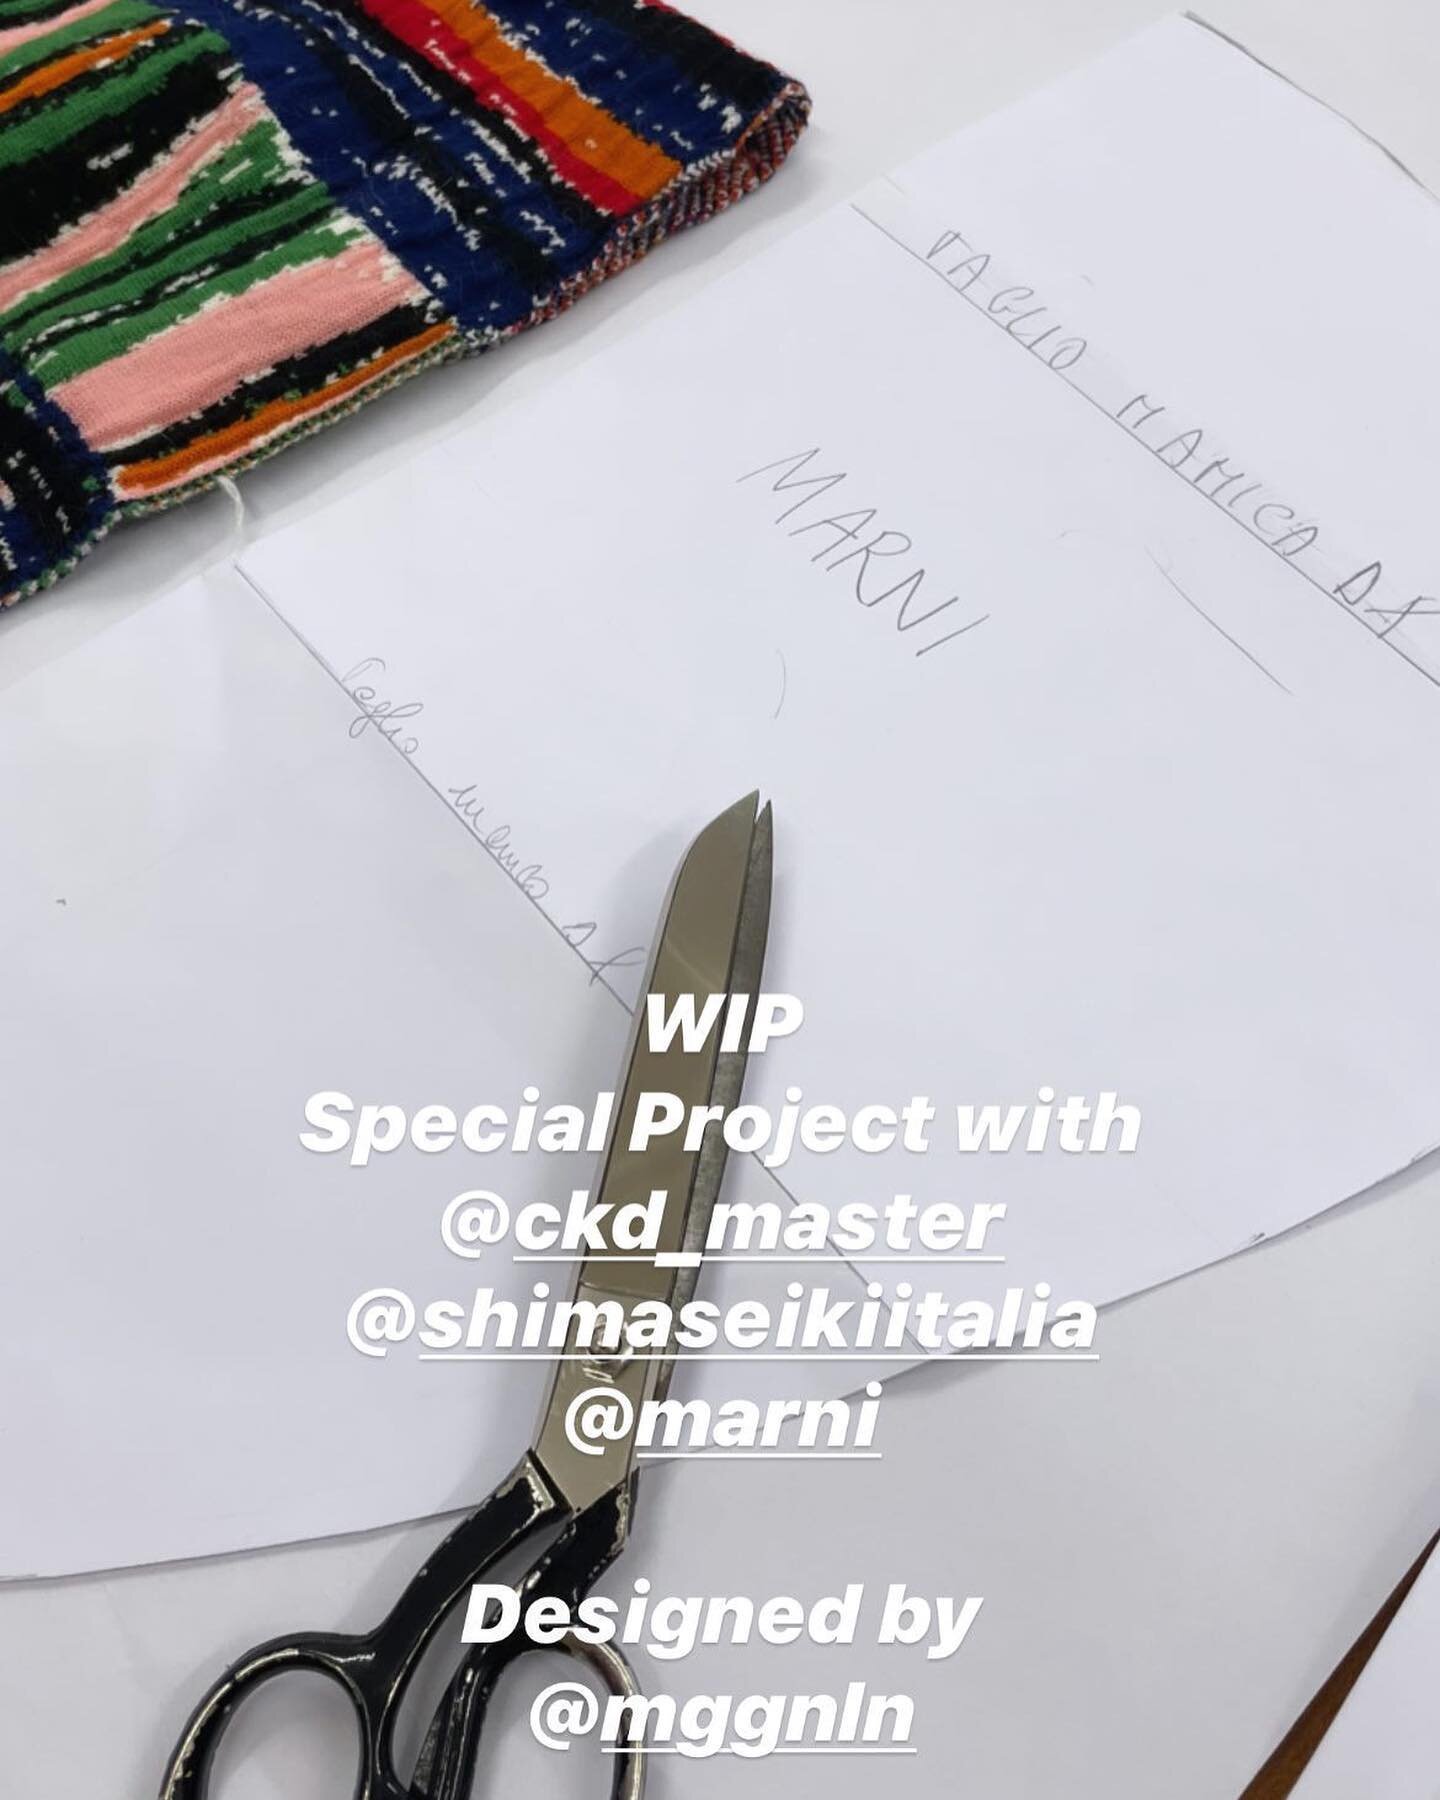 Special projects 🧶✂️ 
Made by MRC
Design: @mggnln for @marni 
With:
@ckd_master 
@shimaseikiitalia 
@accademiacostumeemoda 

#knitwear
#masters
#mrcknitwear
#artisanal
#madeinItaly
#innovation
#textiles
#technicaltextiles
#marni
#textures
#knitting
